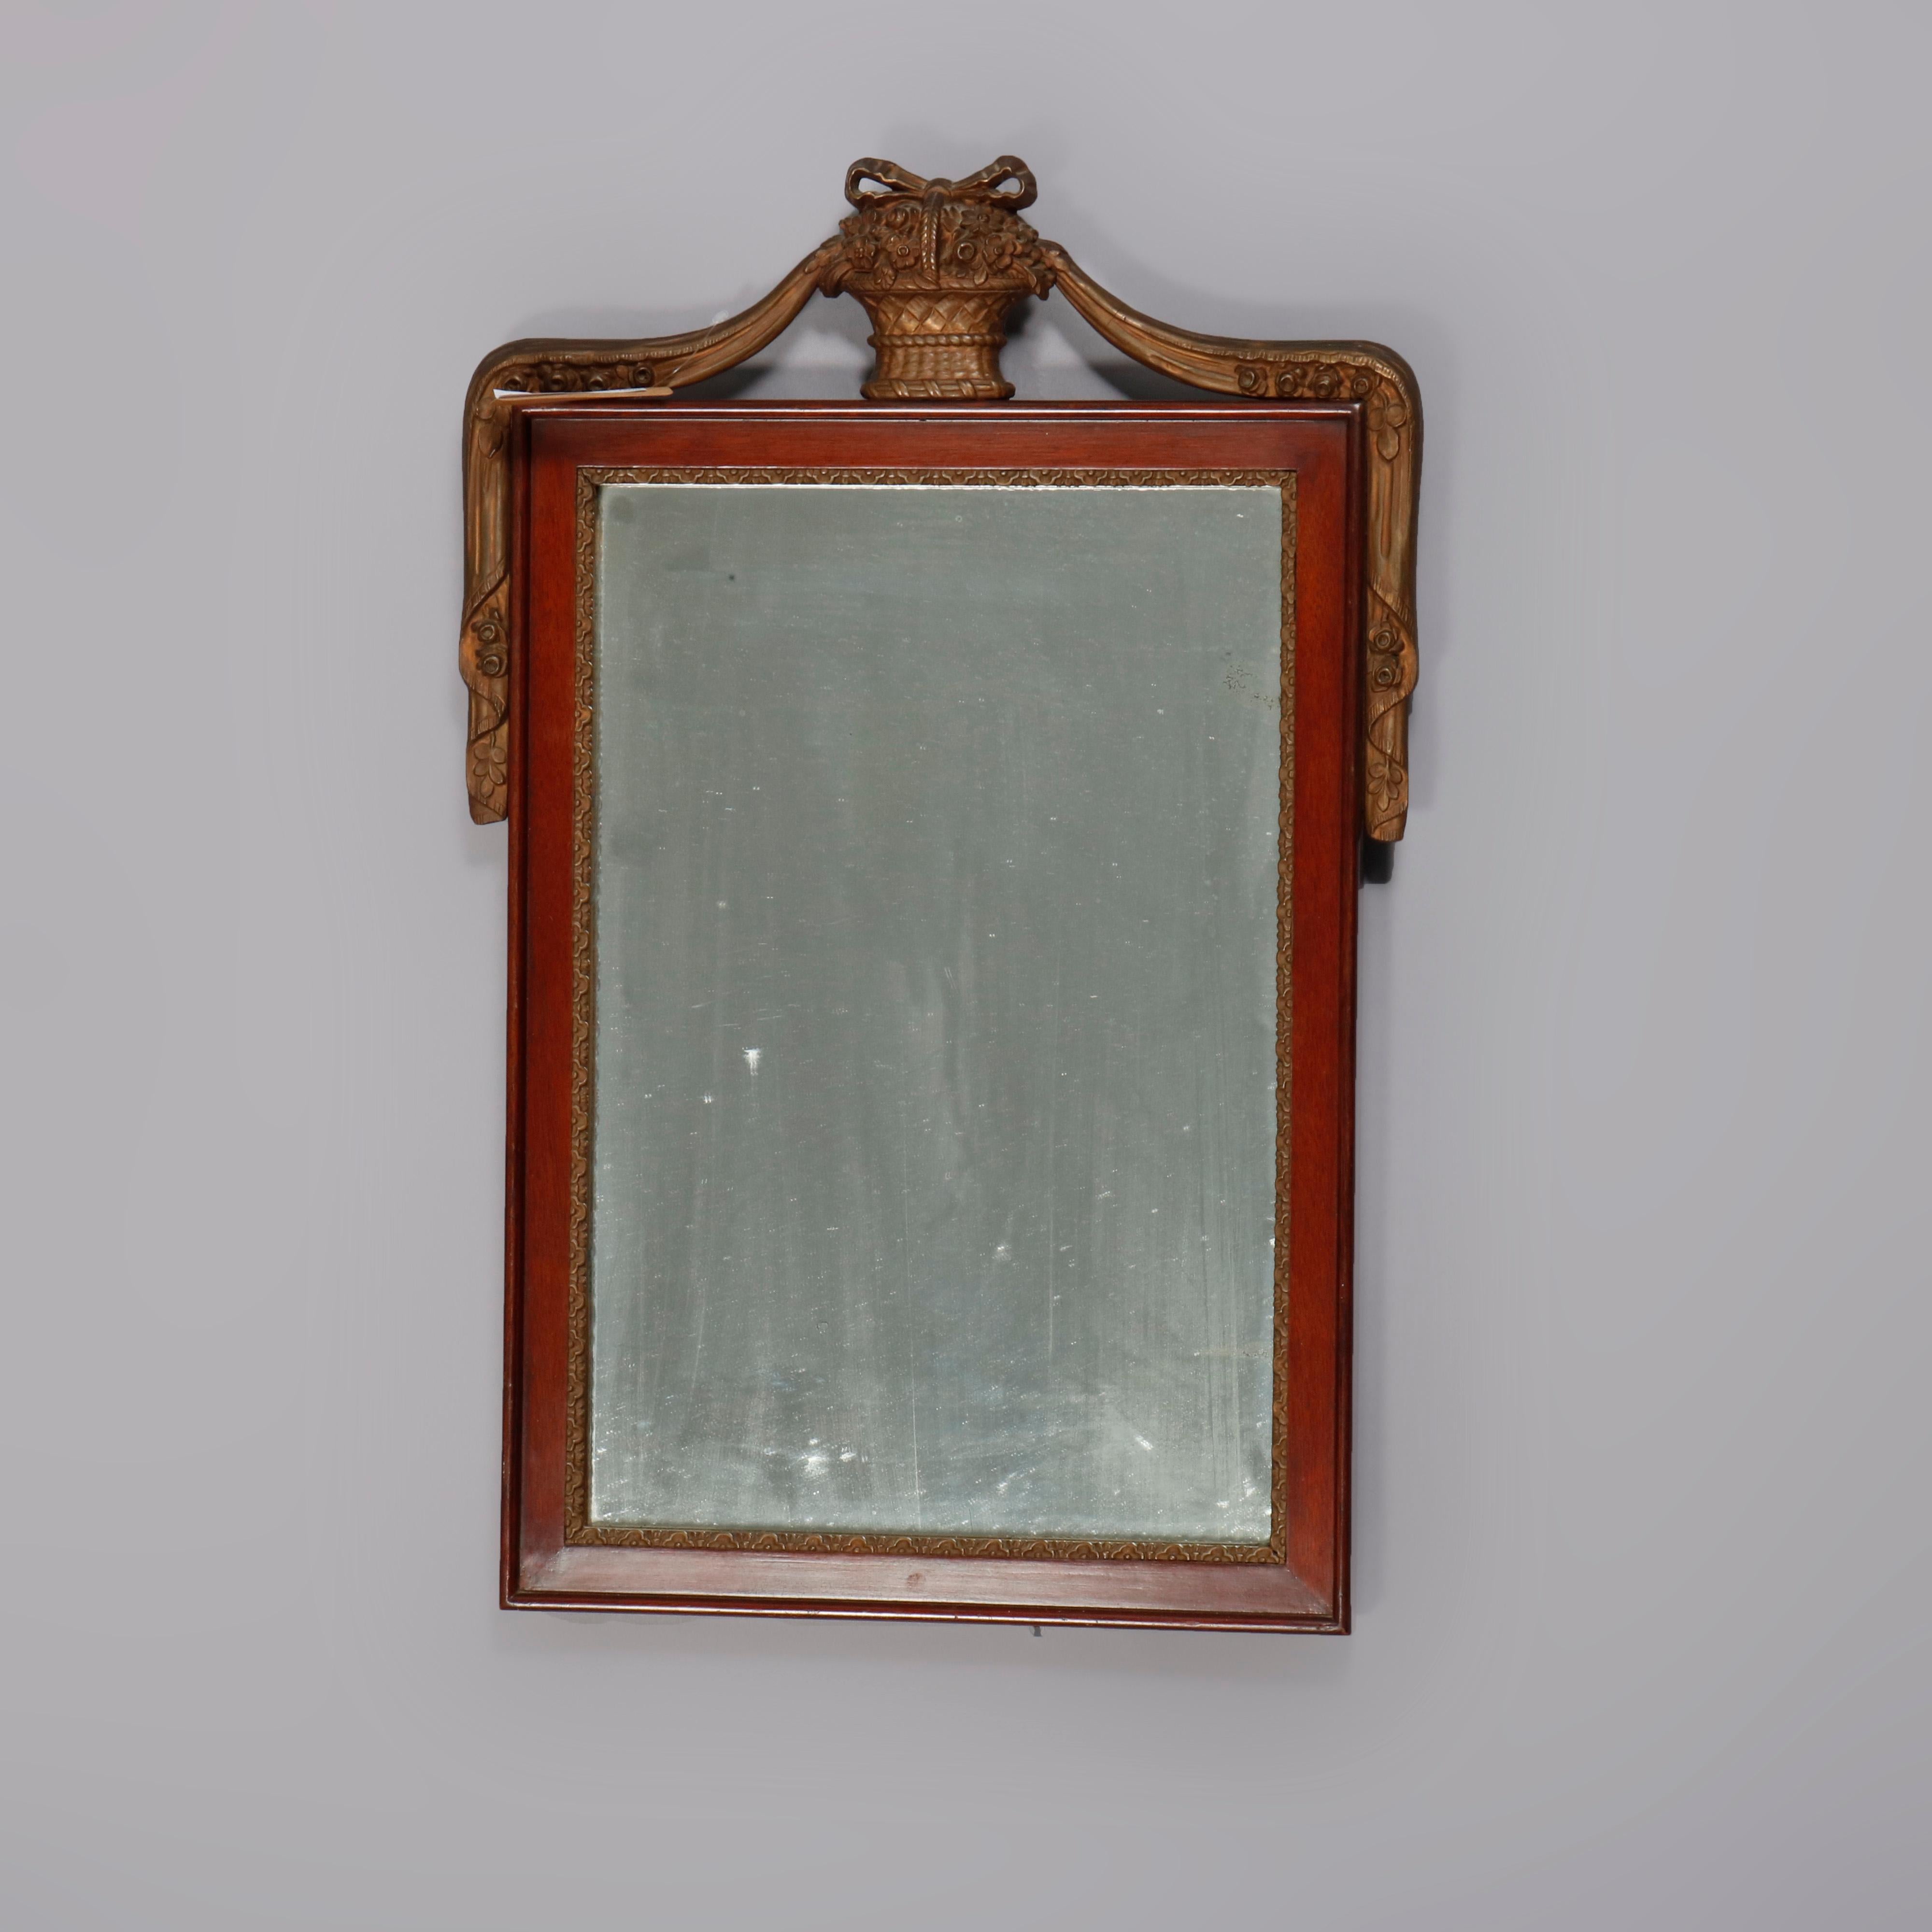 An antique French Neoclassical wall mirror offers giltwood panier de fleurs finial having flanking drapes surmounting mahogany framed wall mirror, circa 1920.

Measures- 24